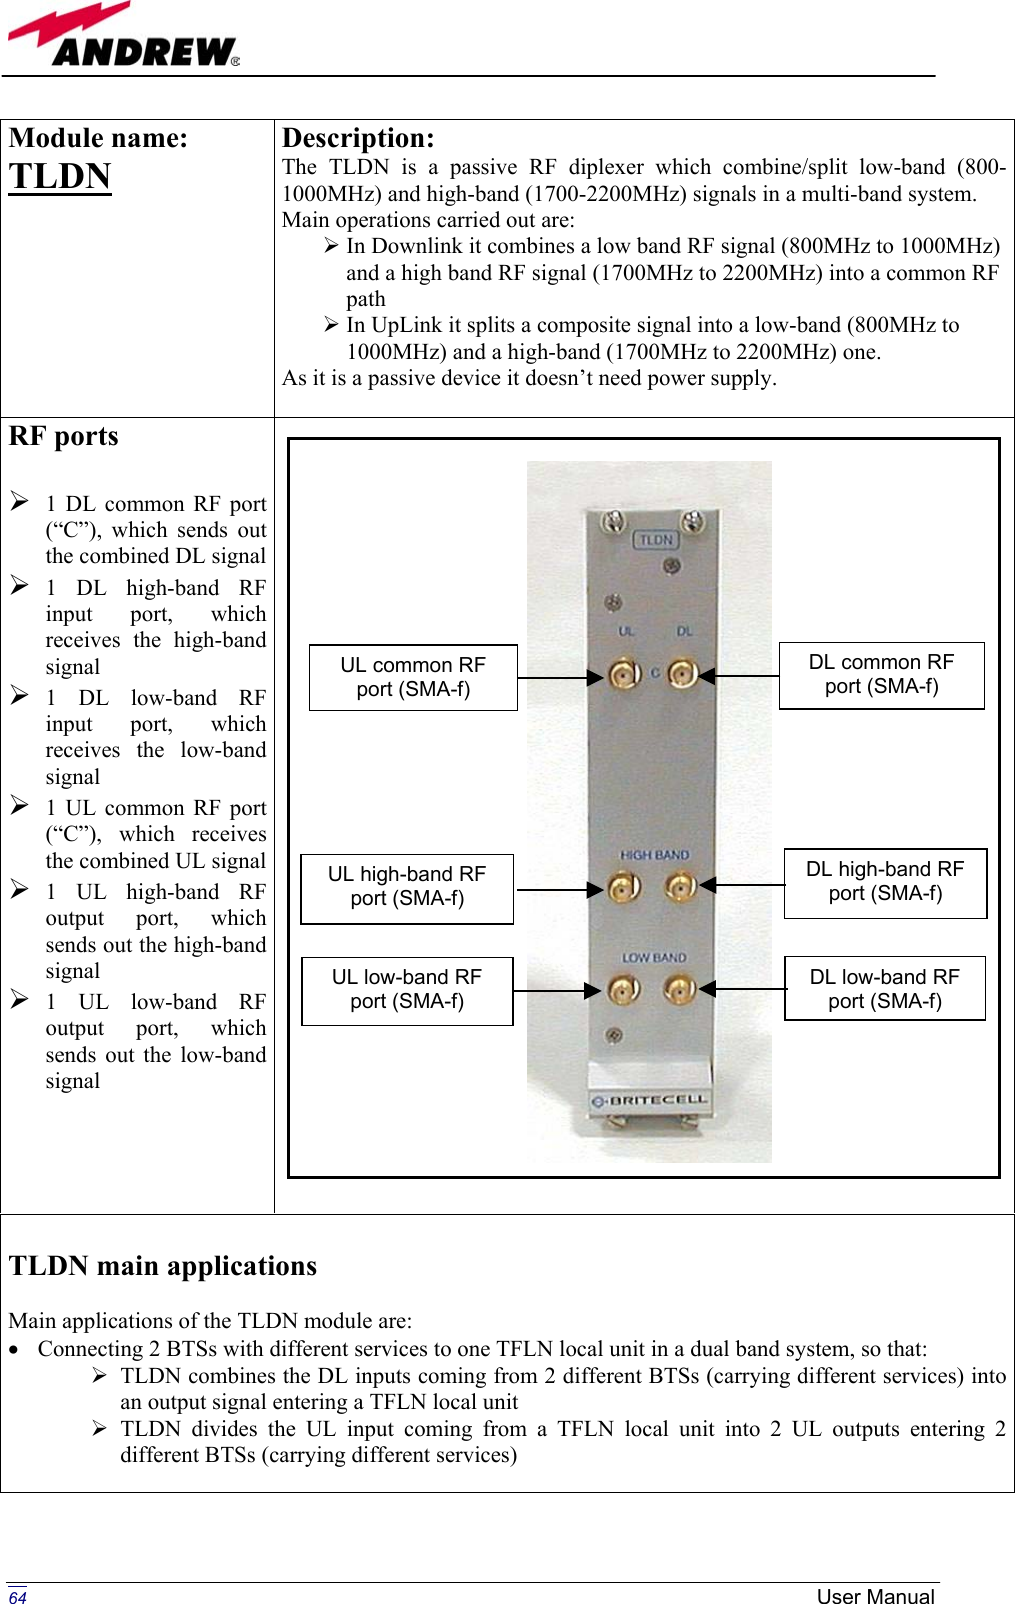   Module name:  TLDN  Description: The TLDN is a passive RF diplexer which combine/split low-band (800-1000MHz) and high-band (1700-2200MHz) signals in a multi-band system. Main operations carried out are:  In Downlink it combines a low band RF signal (800MHz to 1000MHz) and a high band RF signal (1700MHz to 2200MHz) into a common RF path   In UpLink it splits a composite signal into a low-band (800MHz to 1000MHz) and a high-band (1700MHz to 2200MHz) one. As it is a passive device it doesn’t need power supply.  RF ports   1 DL common RF port (“C”), which sends out the combined DL signal 1 DL high-band RF input port, which receives the high-band signal  1 DL low-band RF input port, which receives the low-band signal  1 UL common RF port (“C”), which receives the combined UL signal 1 UL high-band RF output port, which sends out the high-band signal  1 UL low-band RF output port, which sends out the low-band signal    TLDN main applications  Main applications of the TLDN module are: •  Connecting 2 BTSs with different services to one TFLN local unit in a dual band system, so that:  TLDN combines the DL inputs coming from 2 different BTSs (carrying different services) into an output signal entering a TFLN local unit  TLDN divides the UL input coming from a TFLN local unit into 2 UL outputs entering 2 different BTSs (carrying different services)  DL common RF port (SMA-f) DL high-band RF port (SMA-f) DL low-band RF port (SMA-f)UL high-band RF port (SMA-f) UL low-band RF port (SMA-f) UL common RF port (SMA-f)   64  User Manual